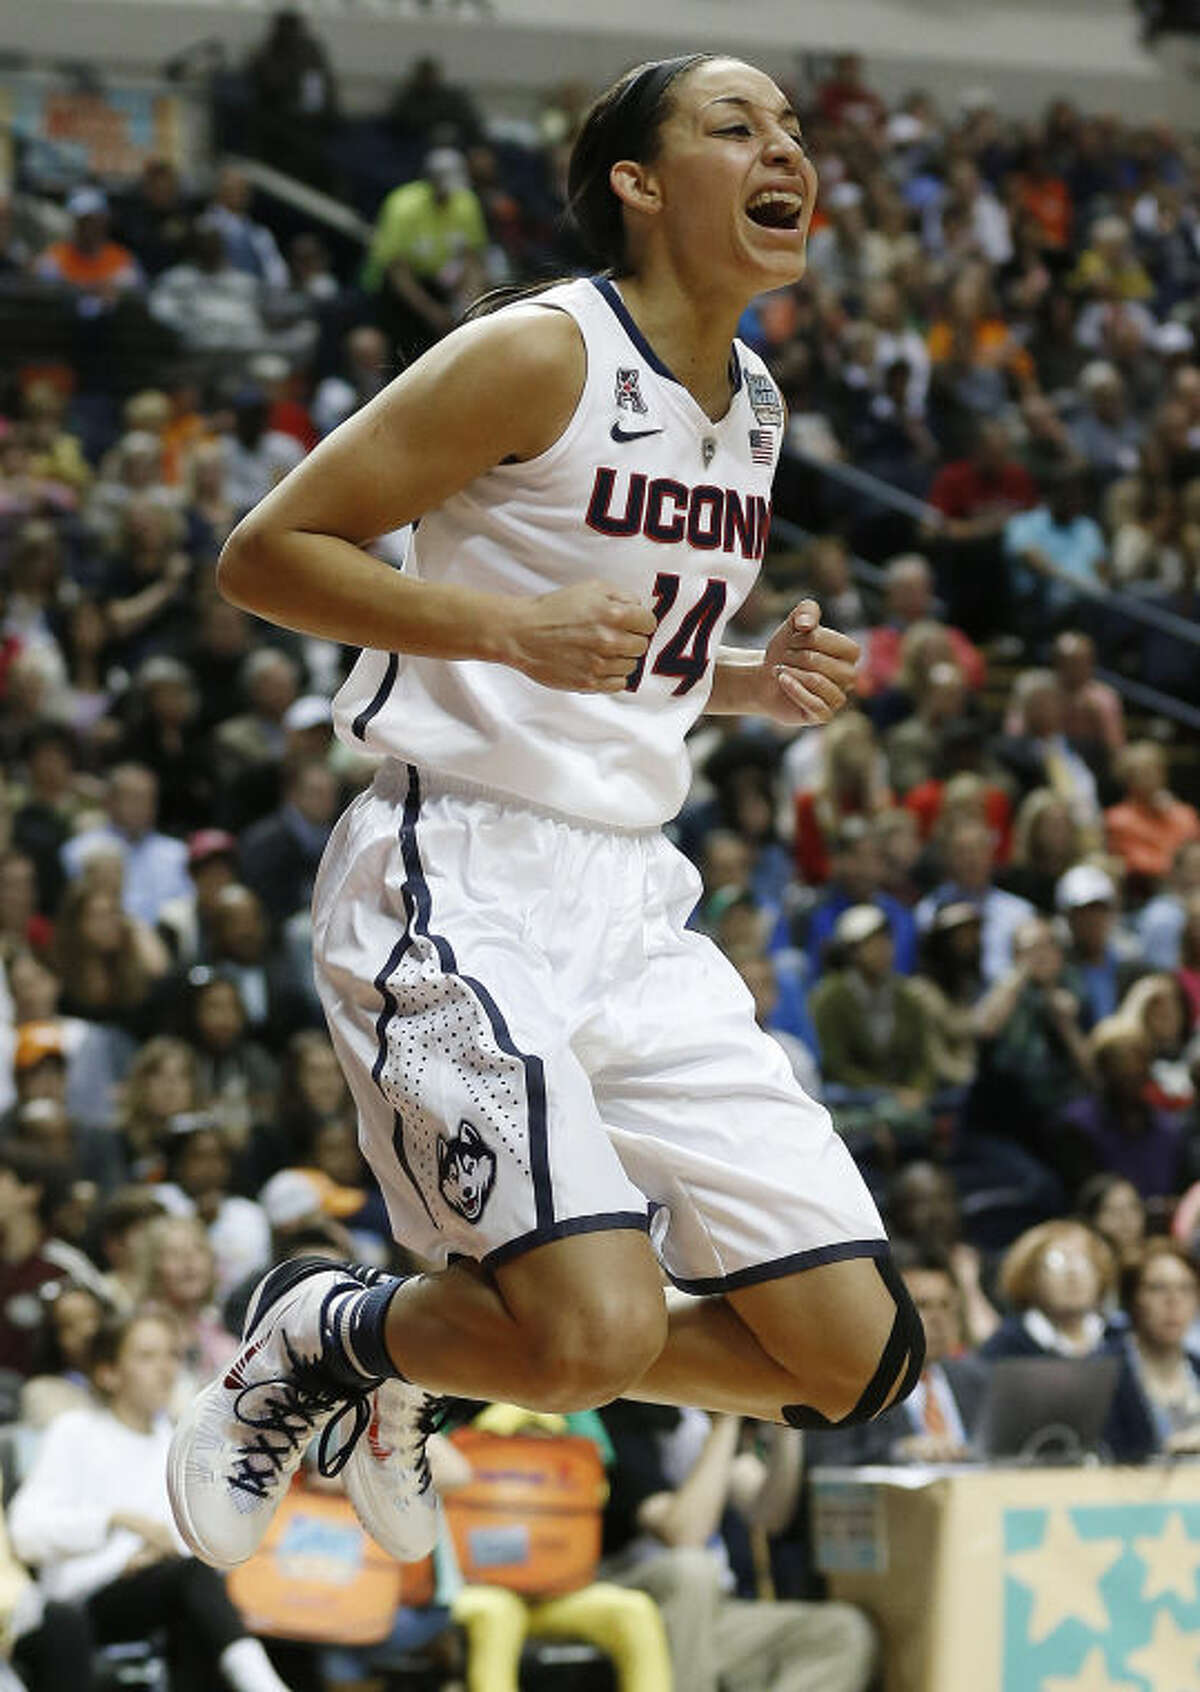 Connecticut guard Bria Hartley (14) celebrates her basket against Stanford during the second half of the semifinal game in the Final Four of the NCAA women's college basketball tournament, Sunday, April 6, 2014, in Nashville, Tenn. (AP Photo/John Bazemore)